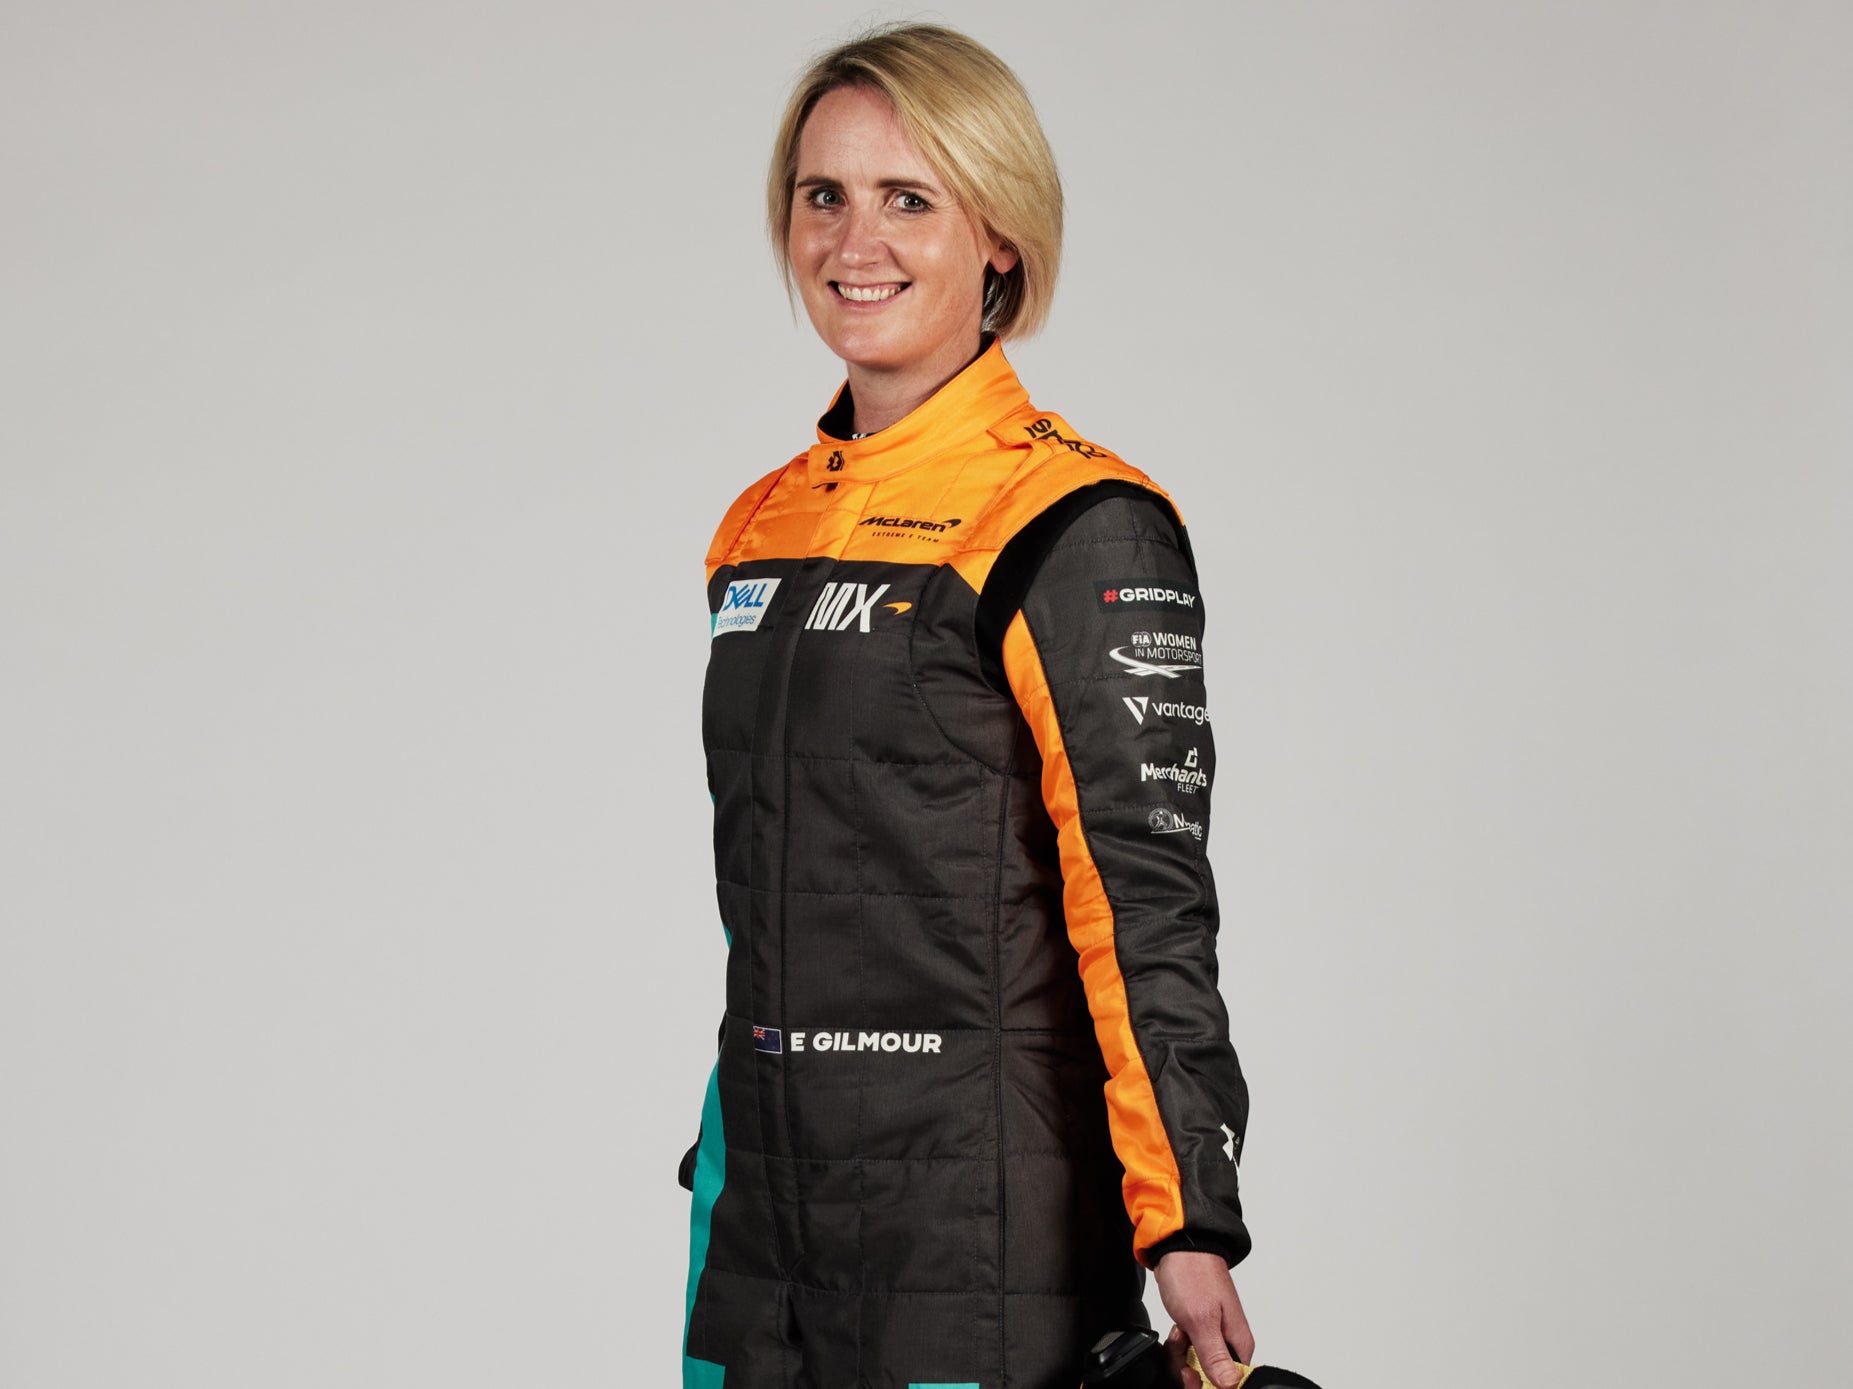 Emma Gilmour will join the Extreme E grid this season